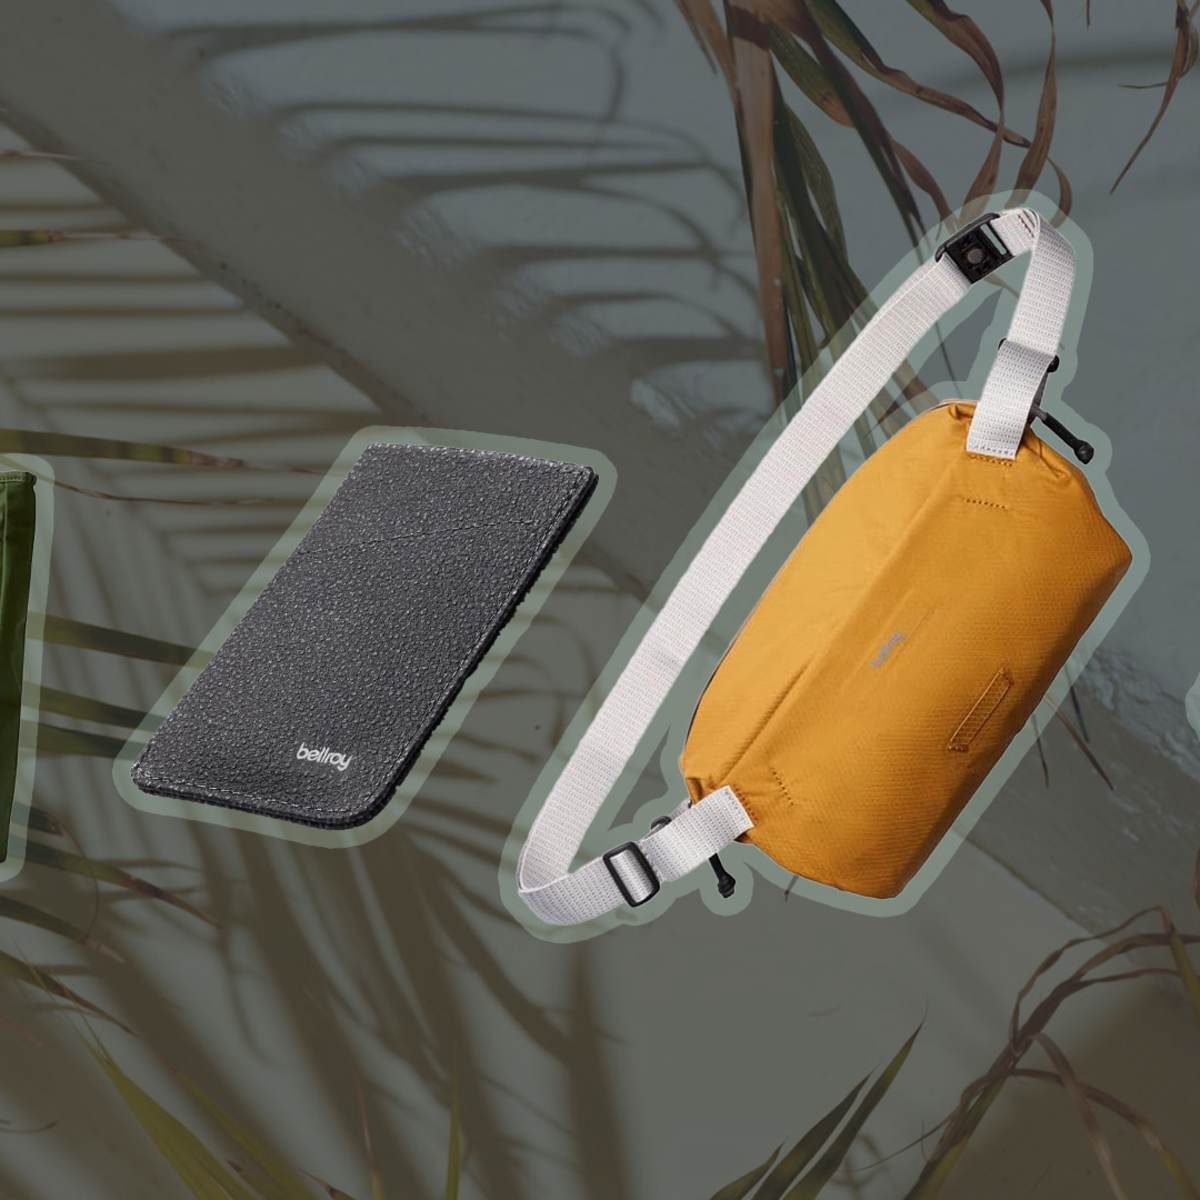 Bellroy's Outlet Sale Has Up to 44% Off Backpacks & More - Men's Journal